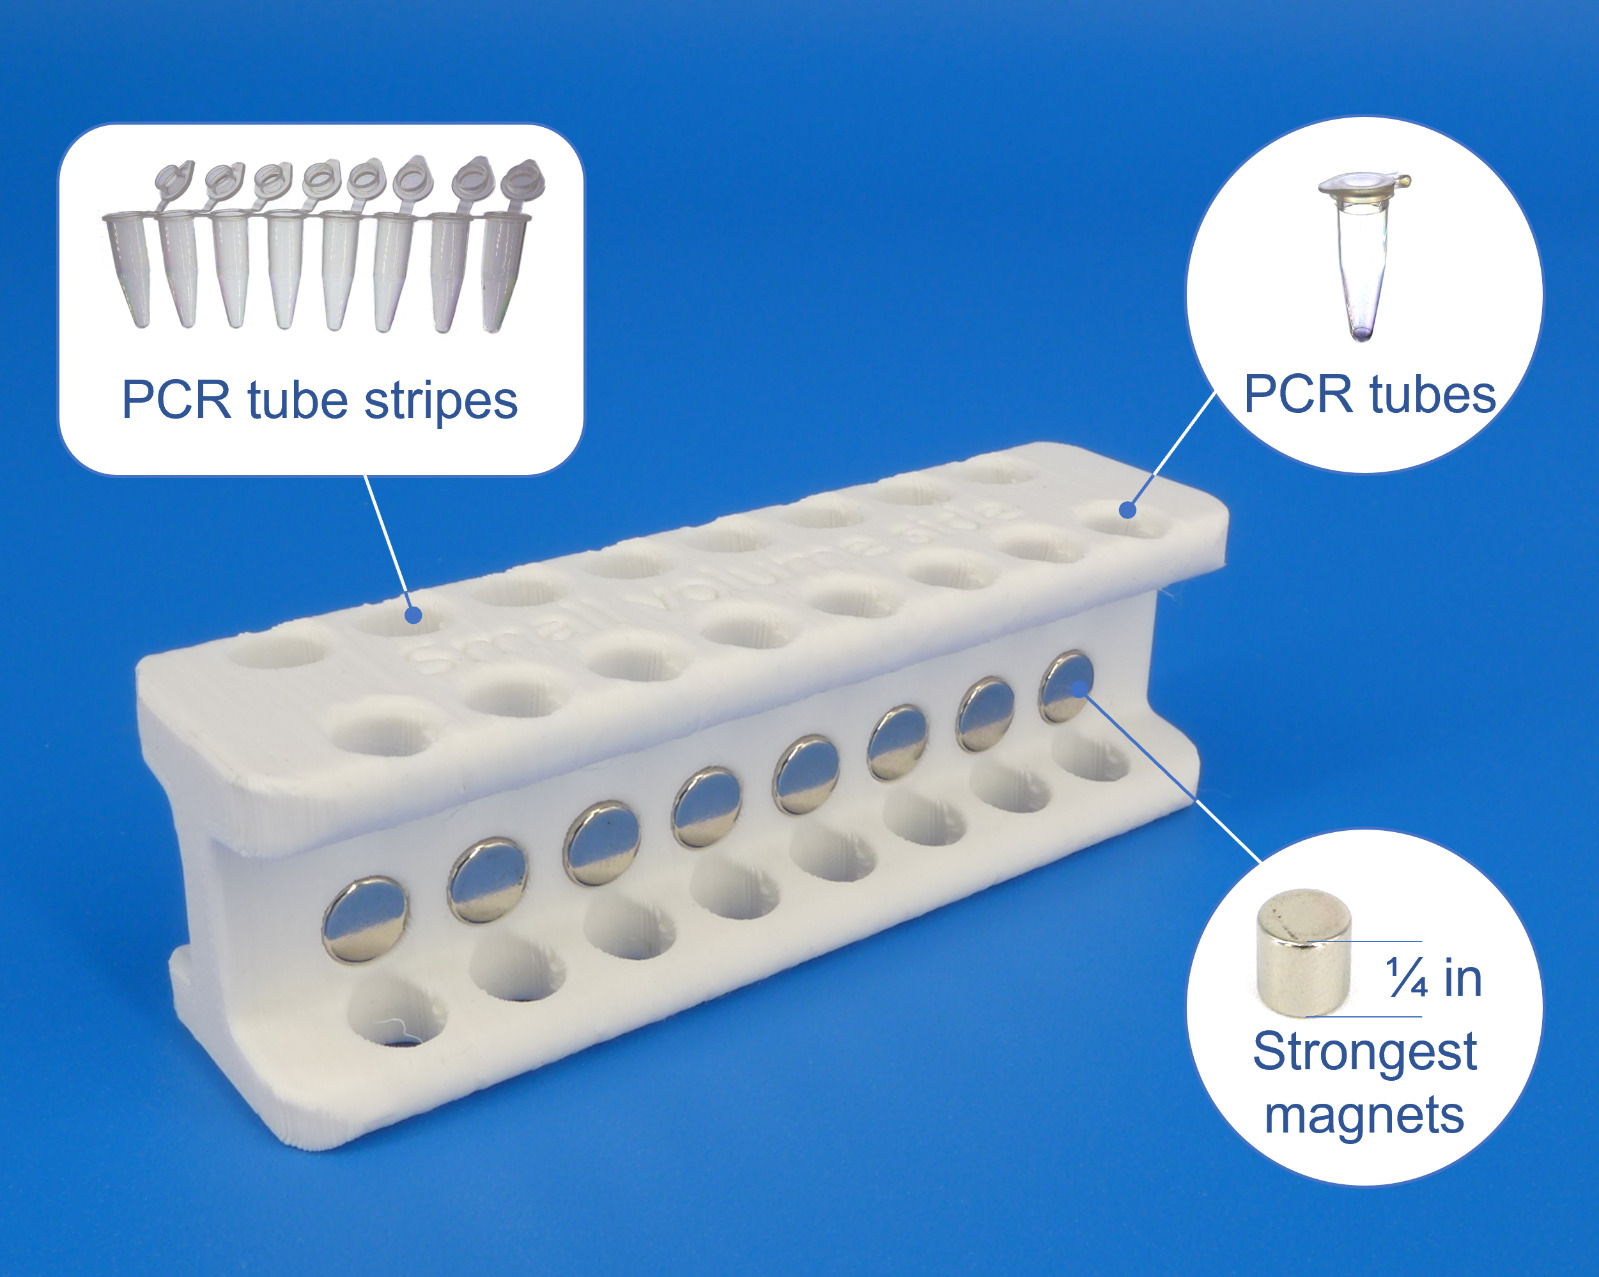 Magnetic rack for DNA, RNA, protein purification, for PCR tubes (100-300 uL)